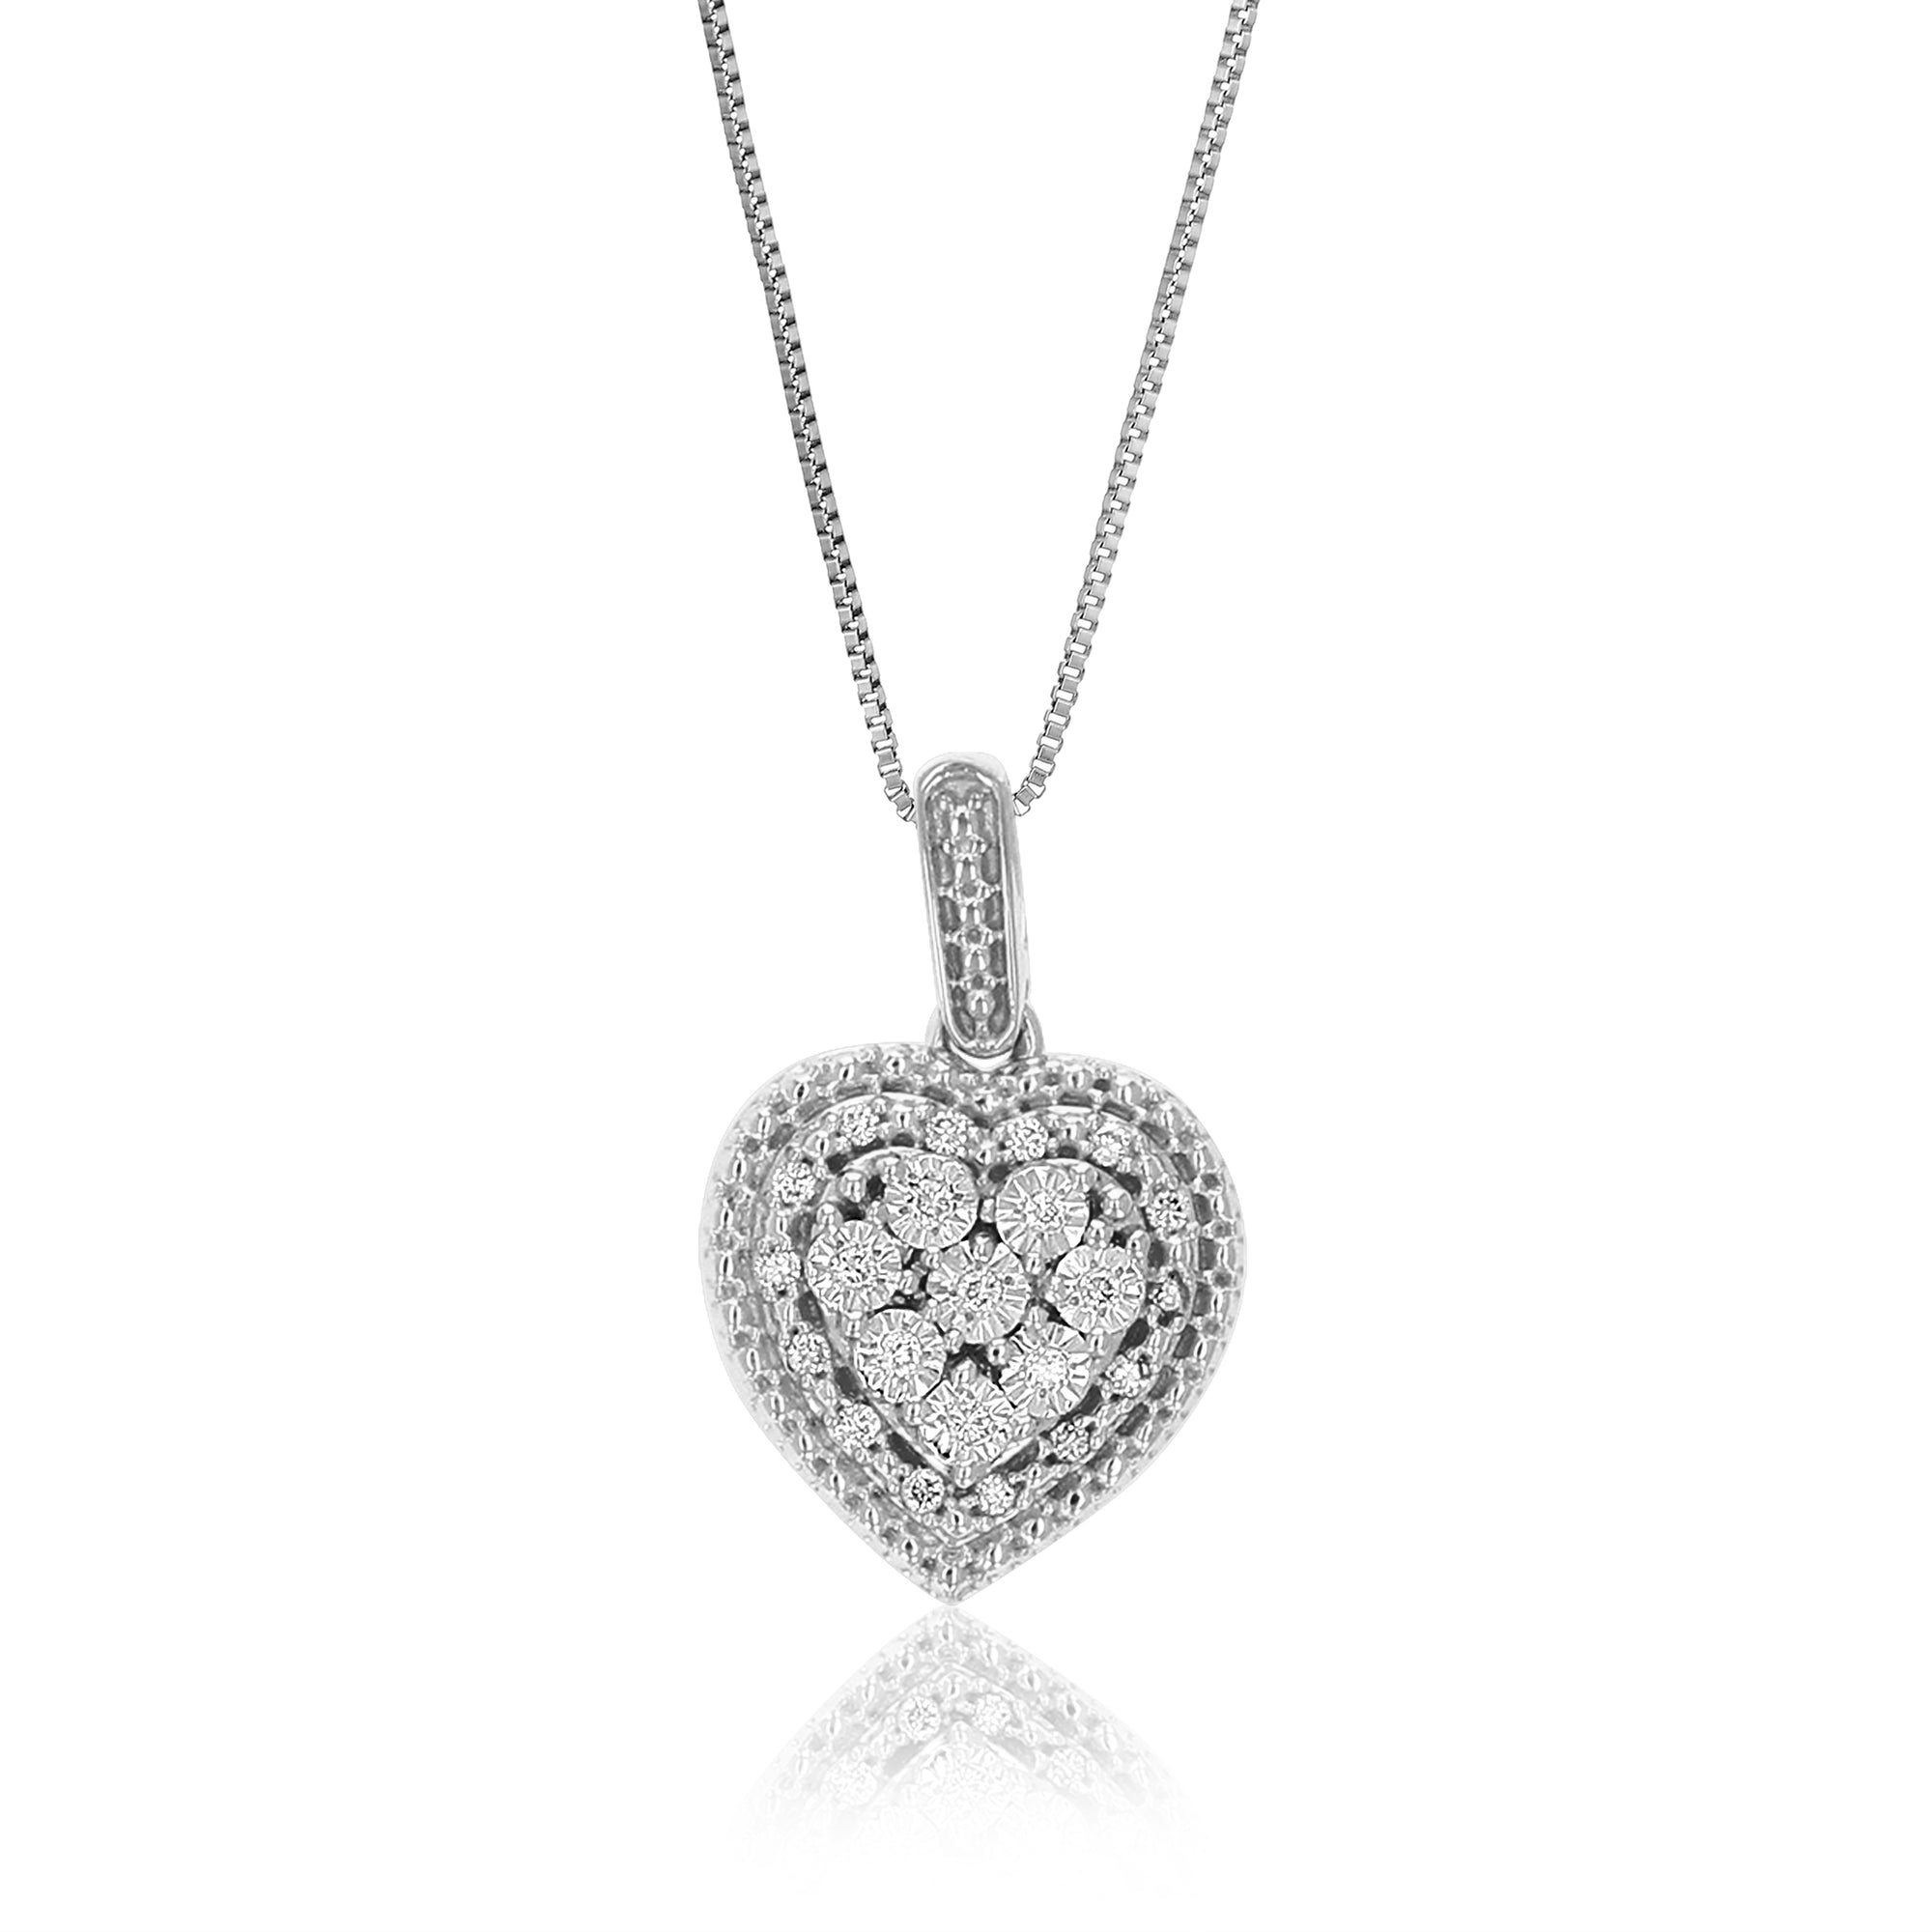 1/12 cttw Diamond Pendant Necklace for Women, Lab Grown Diamond Heart Cluster Pendant Necklace in .925 Sterling Silver with Chain, Size 3/4 Inch